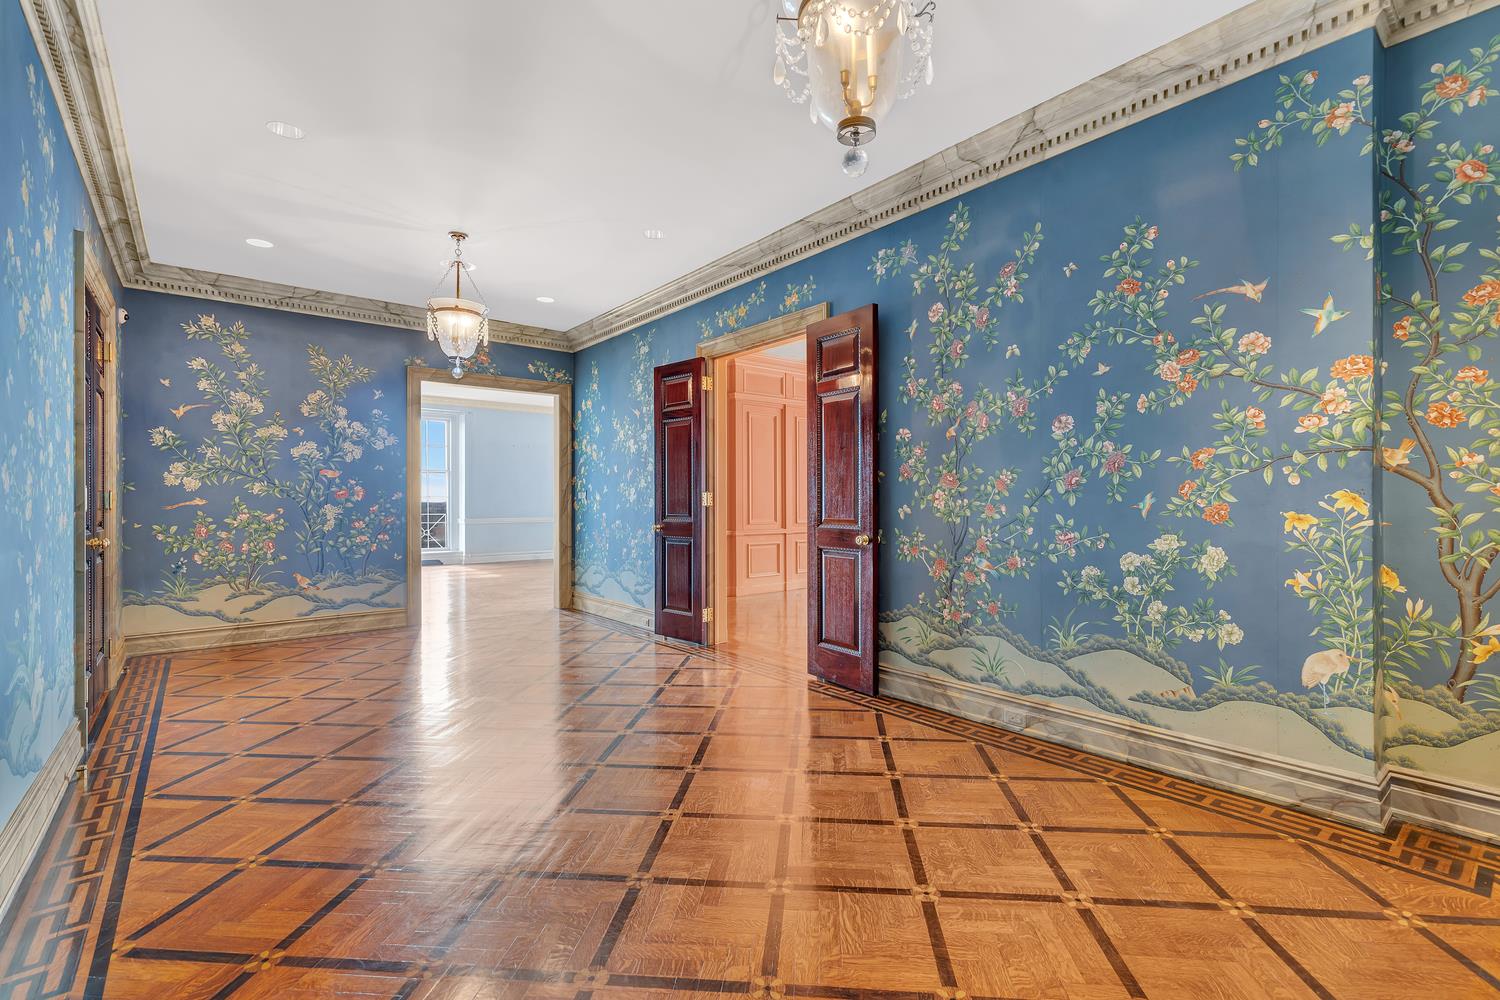 1 Sutton Place 11C, Sutton, Midtown East, NYC - 4 Bedrooms  
4.5 Bathrooms  
11 Rooms - 